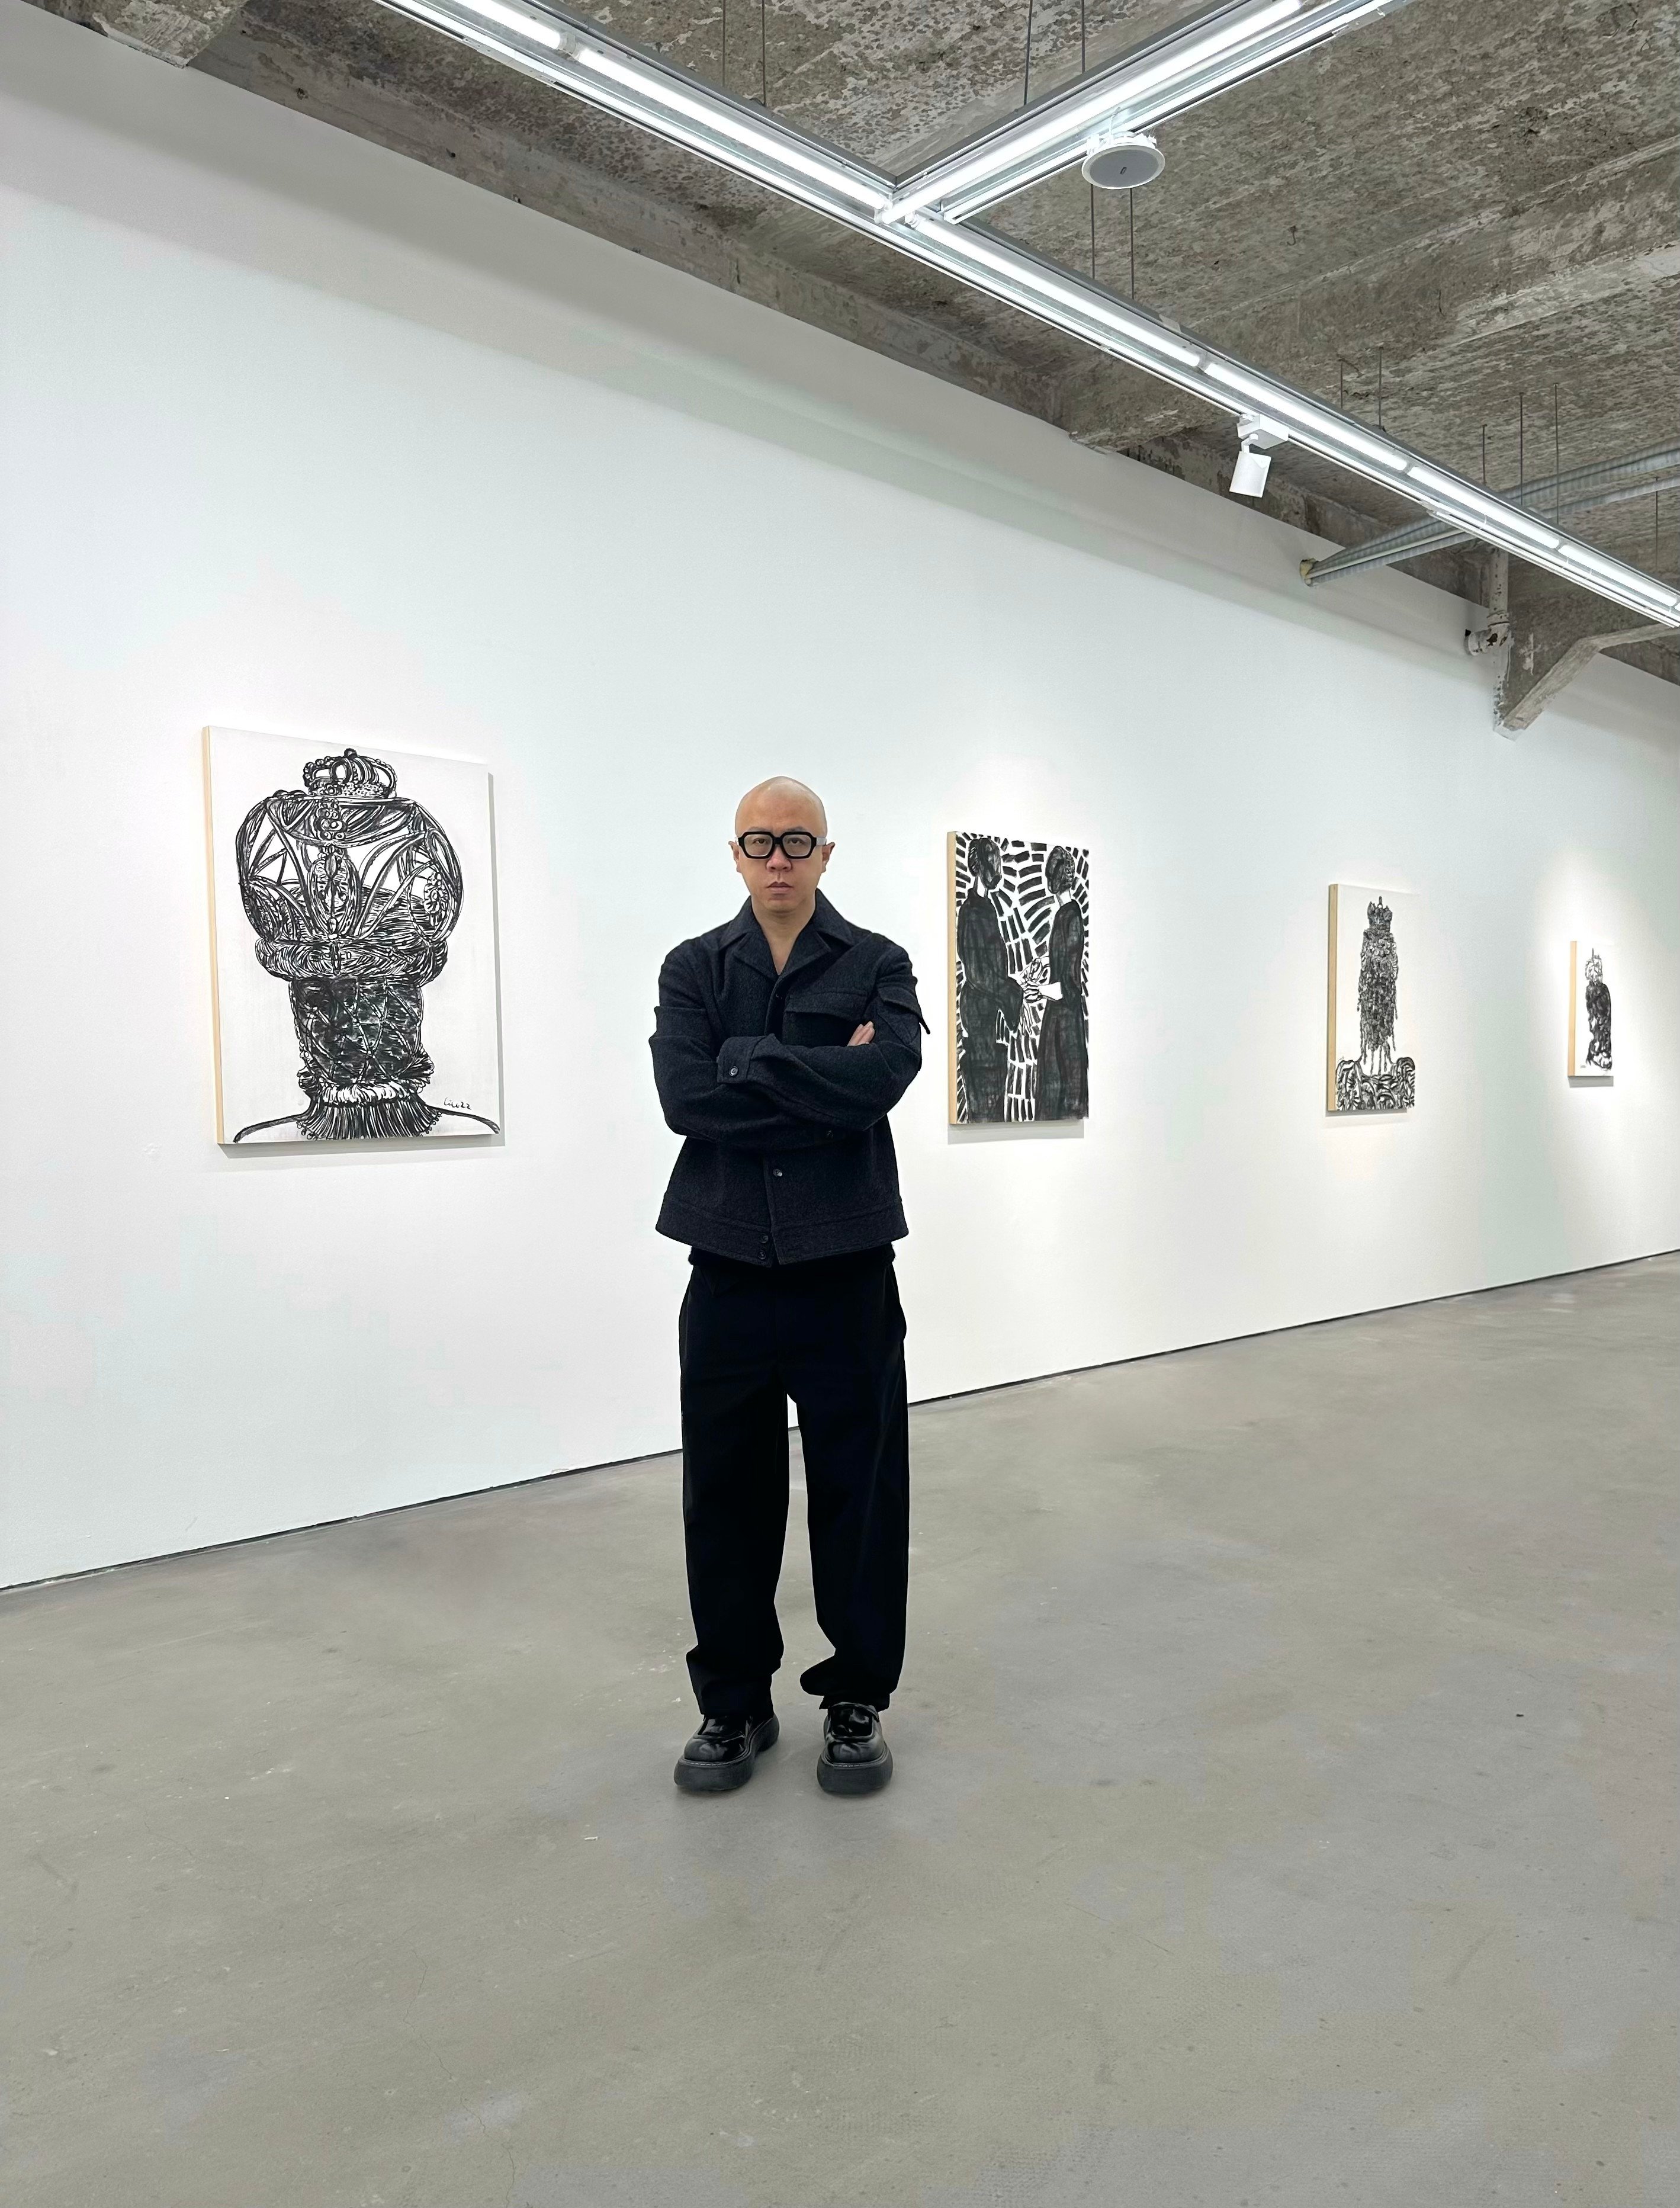 Zhou Jiji, founder of Blank Gallery in Shanghai and Tokyo, was one of dozens of mainland Chinese collectors and art professionals who flew to Singapore in January for the art fairs.